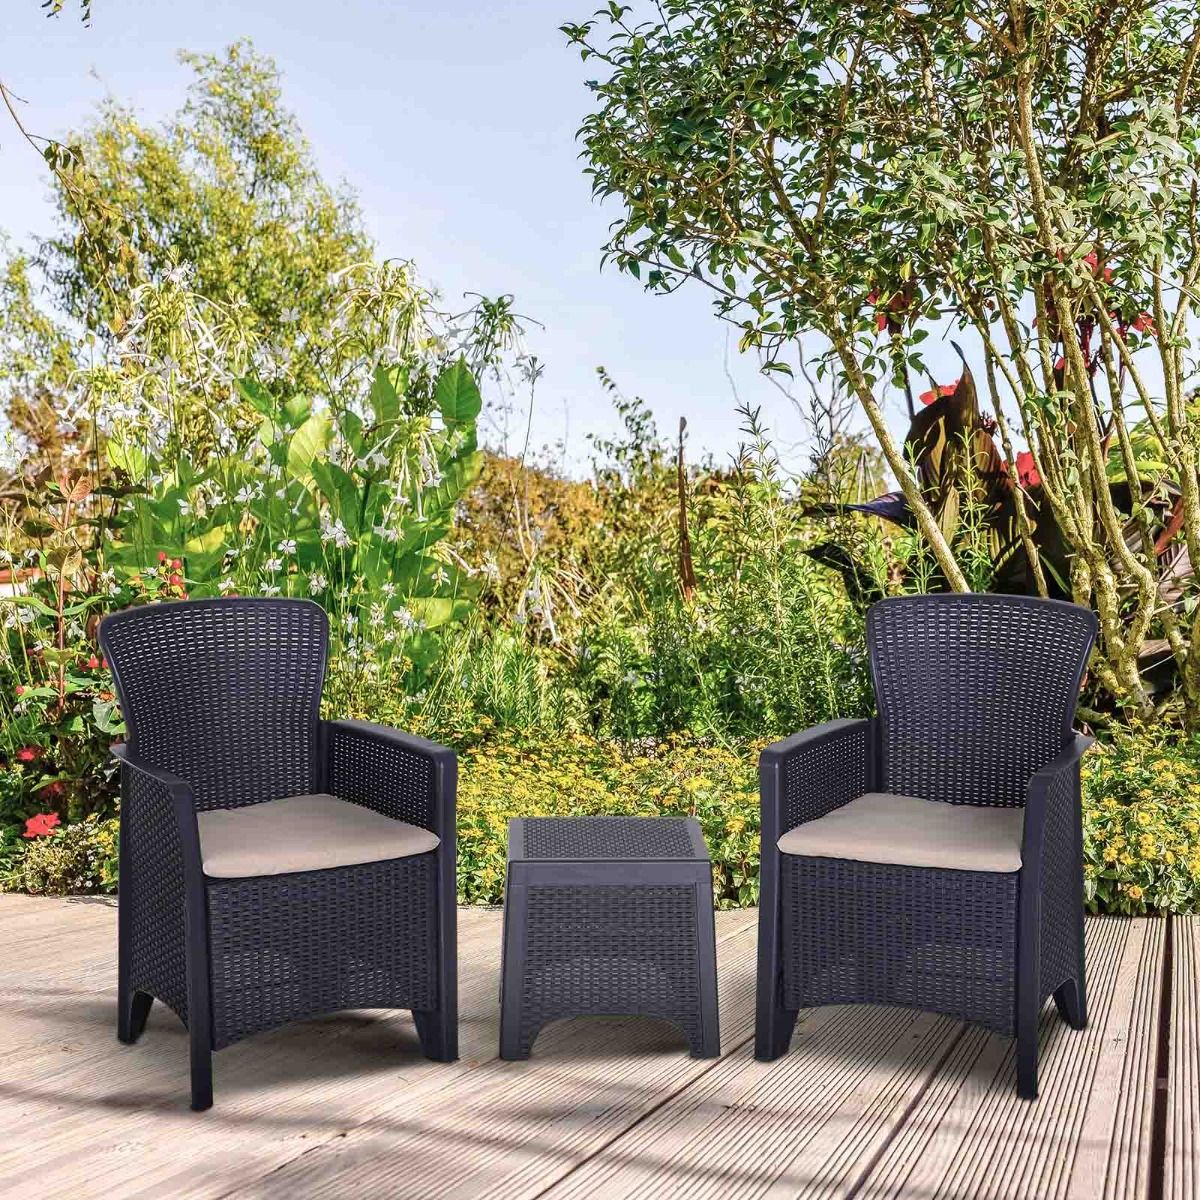 Outsunny Rattan Effect Garden Bistro Set With Coffee Table, 3 Piece - Graphite